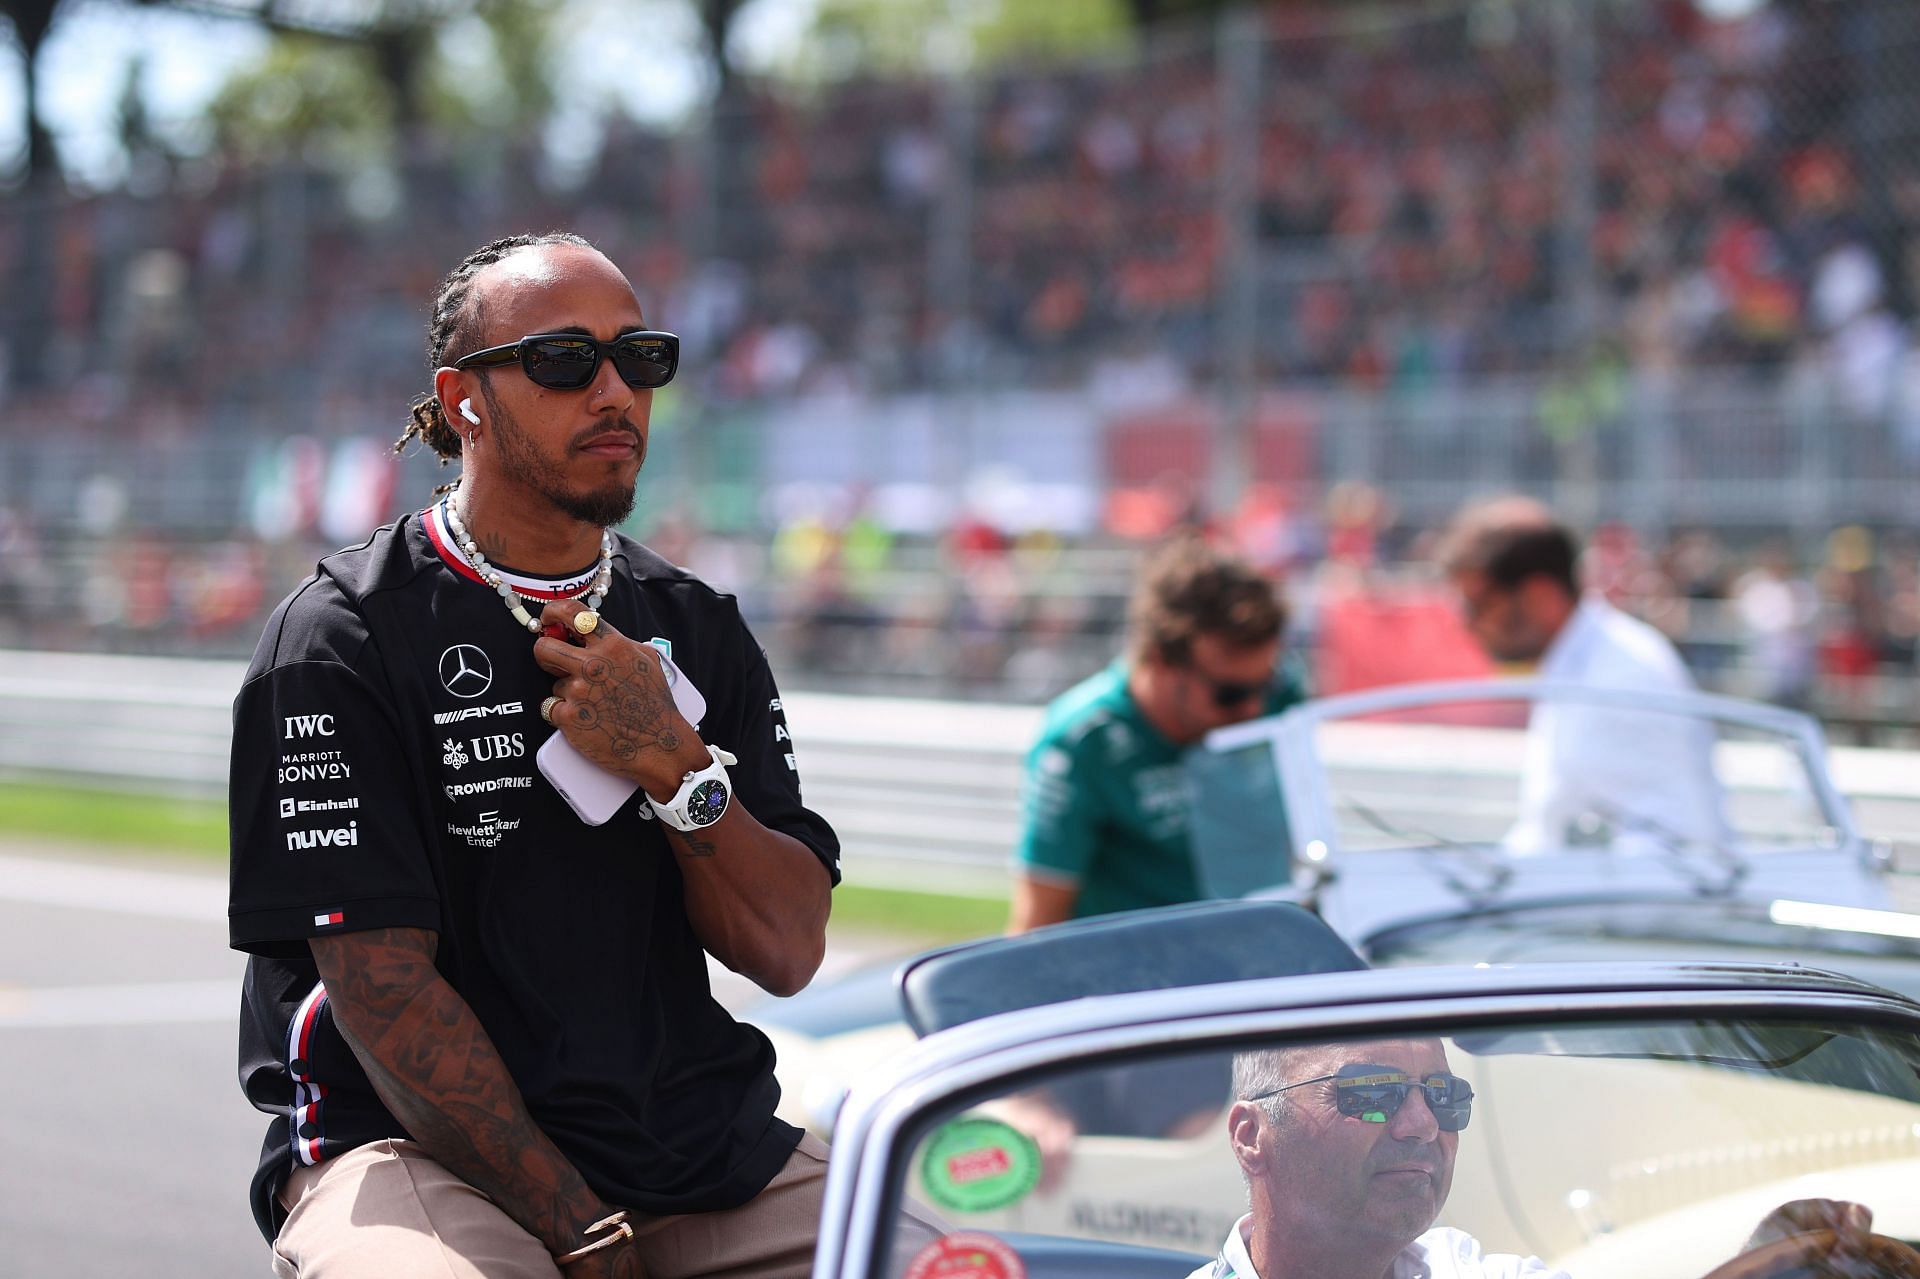 Lewis Hamilton had a disappointing session